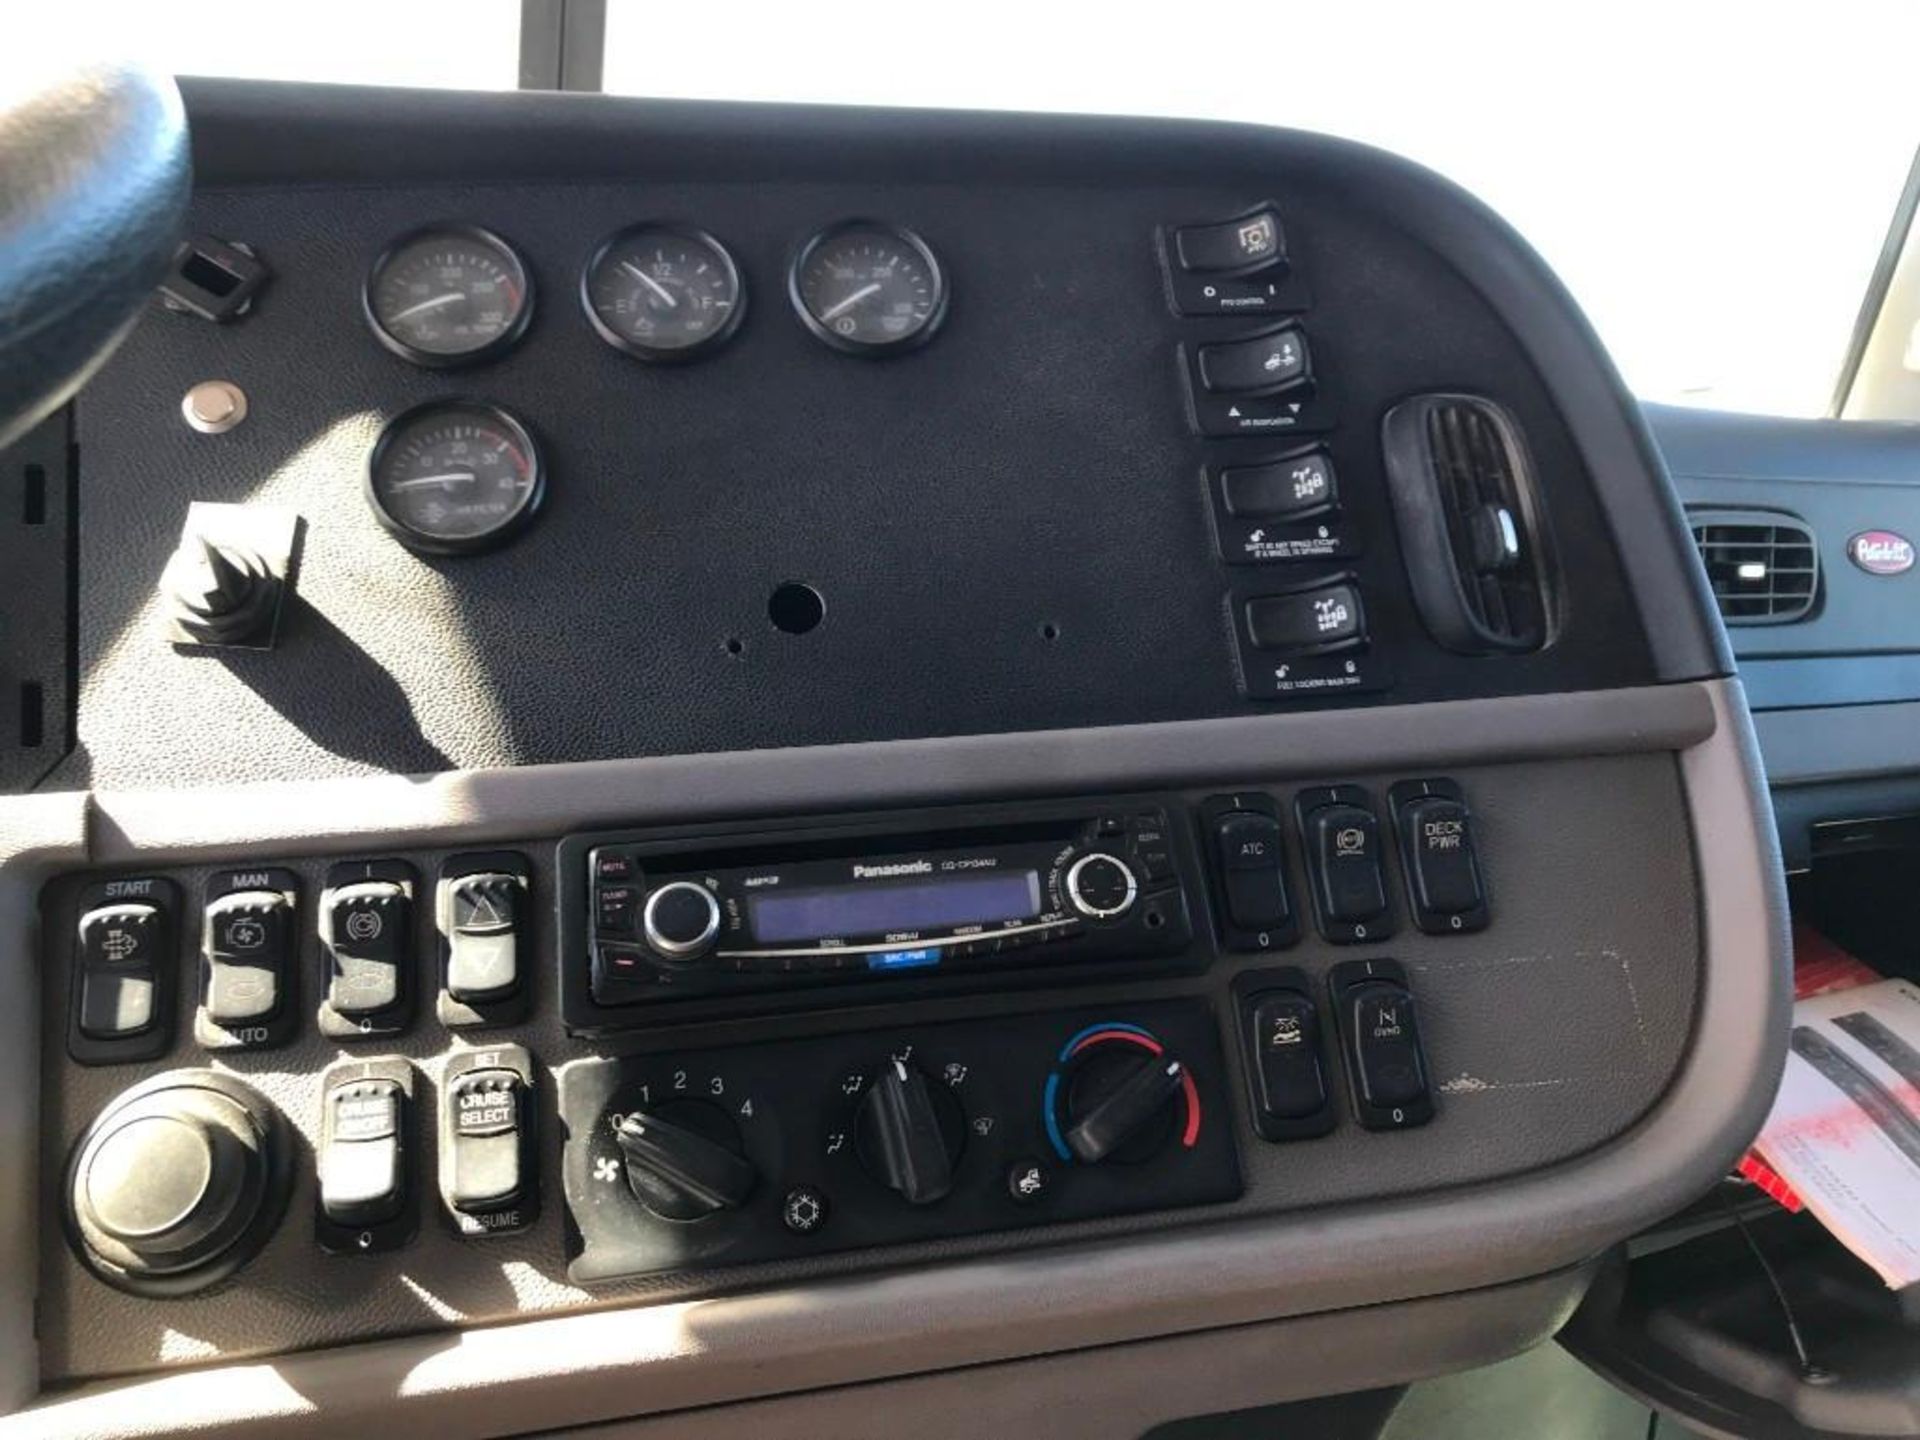 2013 Peterbilt 367 T/A Sleeper Road Tractor (Unit #TRS-279) - Image 10 of 27